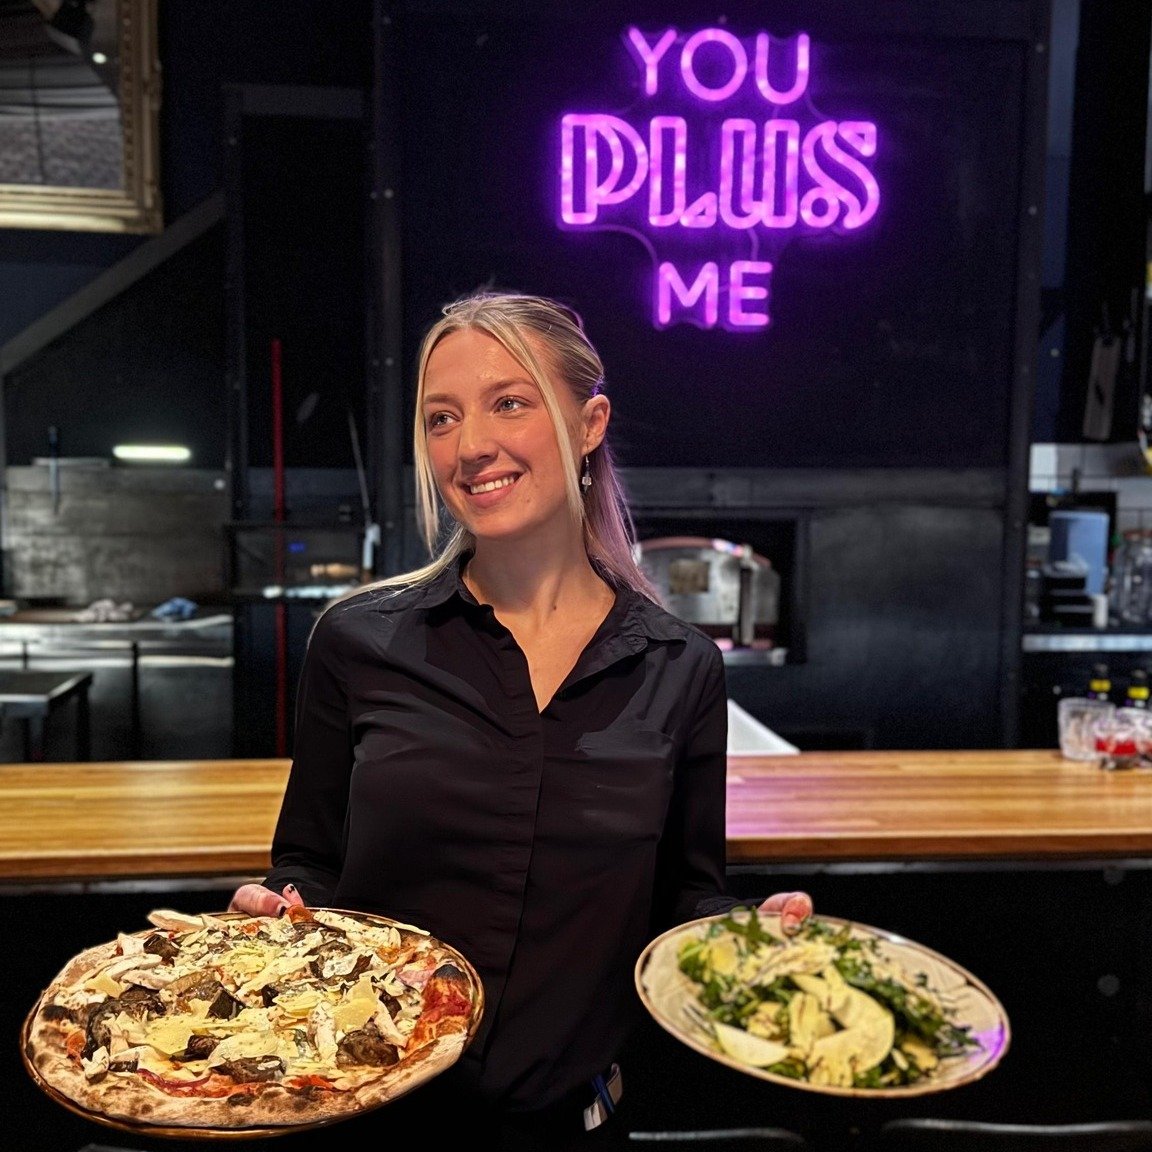 🍕🍹 Ready for the perfect night out? Join us at Plus 5 for hand stretched pizza and expertly crafted cocktails! Whether you're here for dinner or just drinks, we've got you covered. ✨

#PLUS5BAR #PizzaAndCocktails #NightOut #Foodie #Drinks #GoodTime